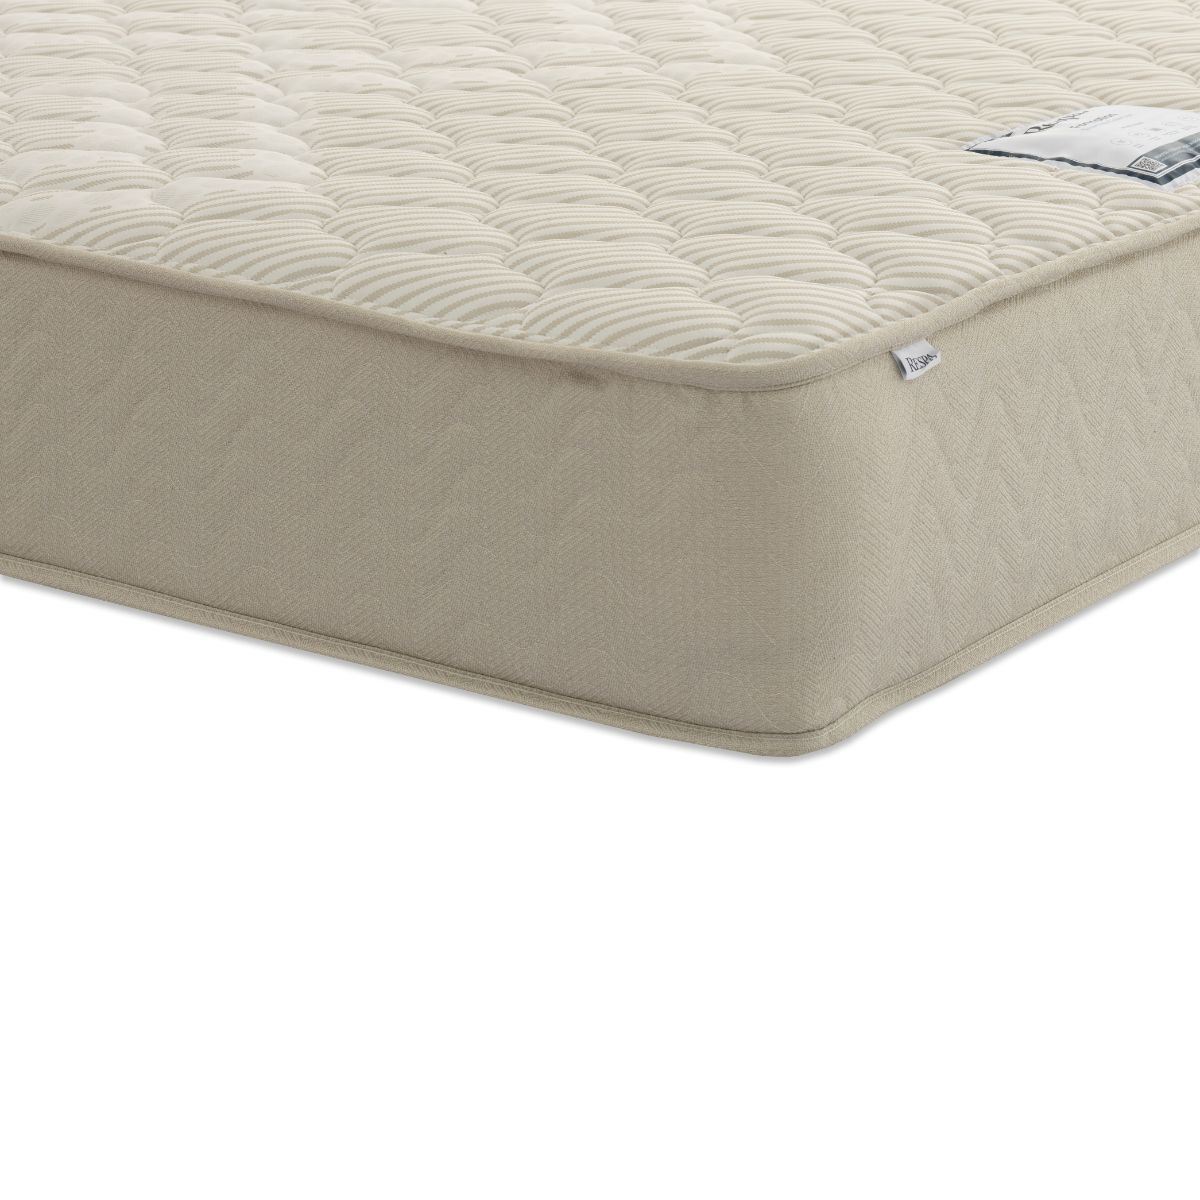 Formation Orthopaedic Mattress by Respa - 3